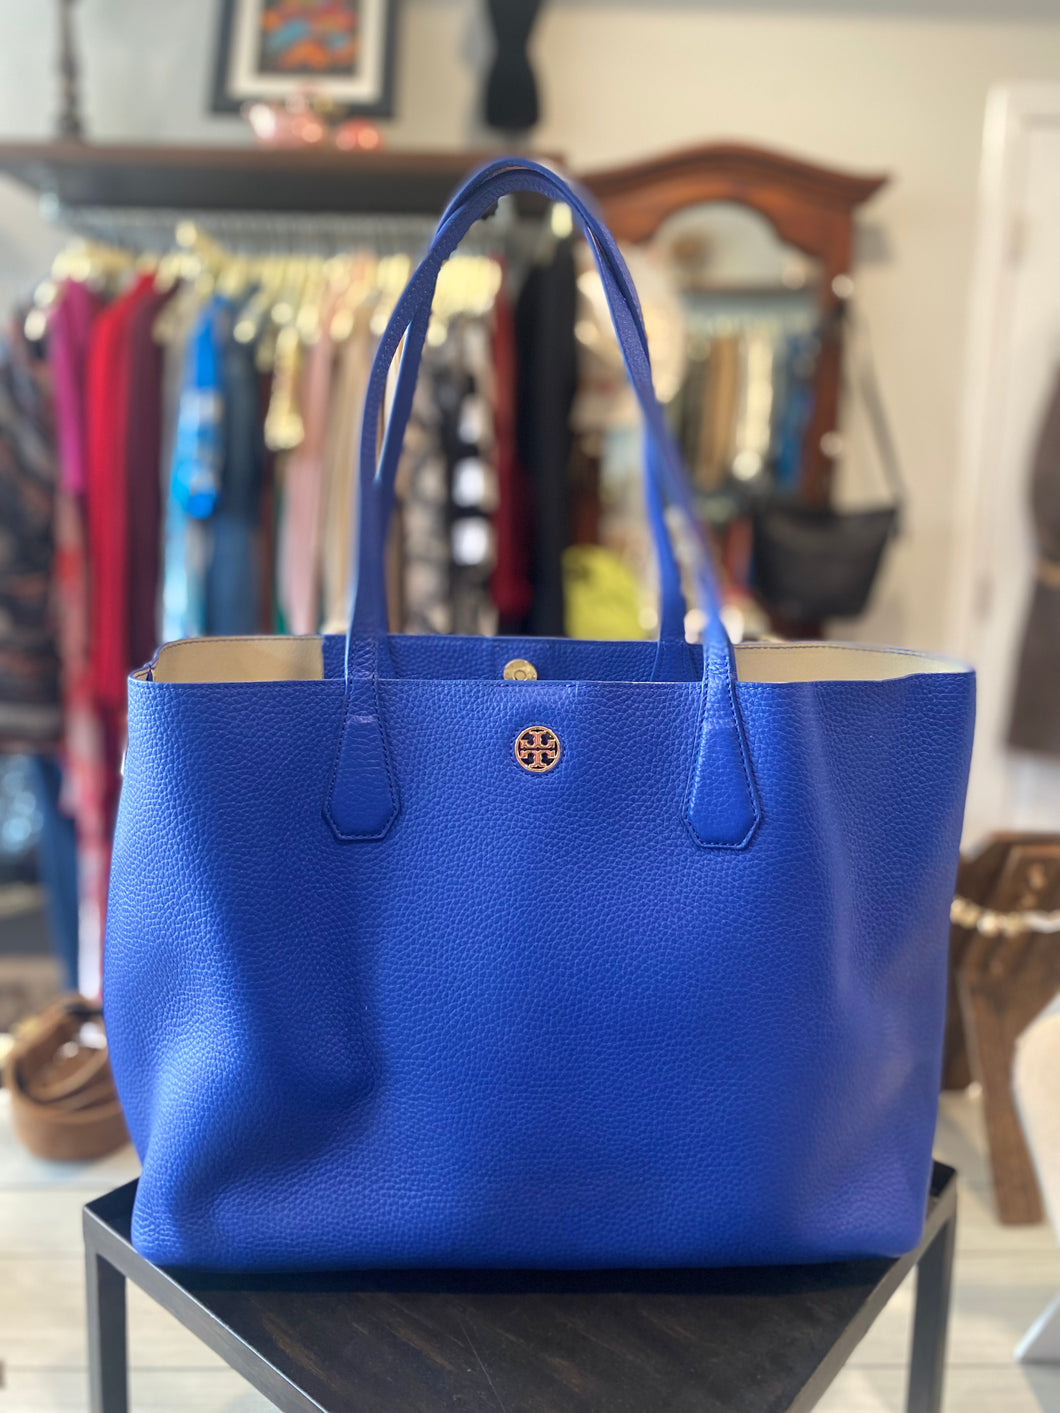 Tory Burch Blue Pebbled Leather Tote